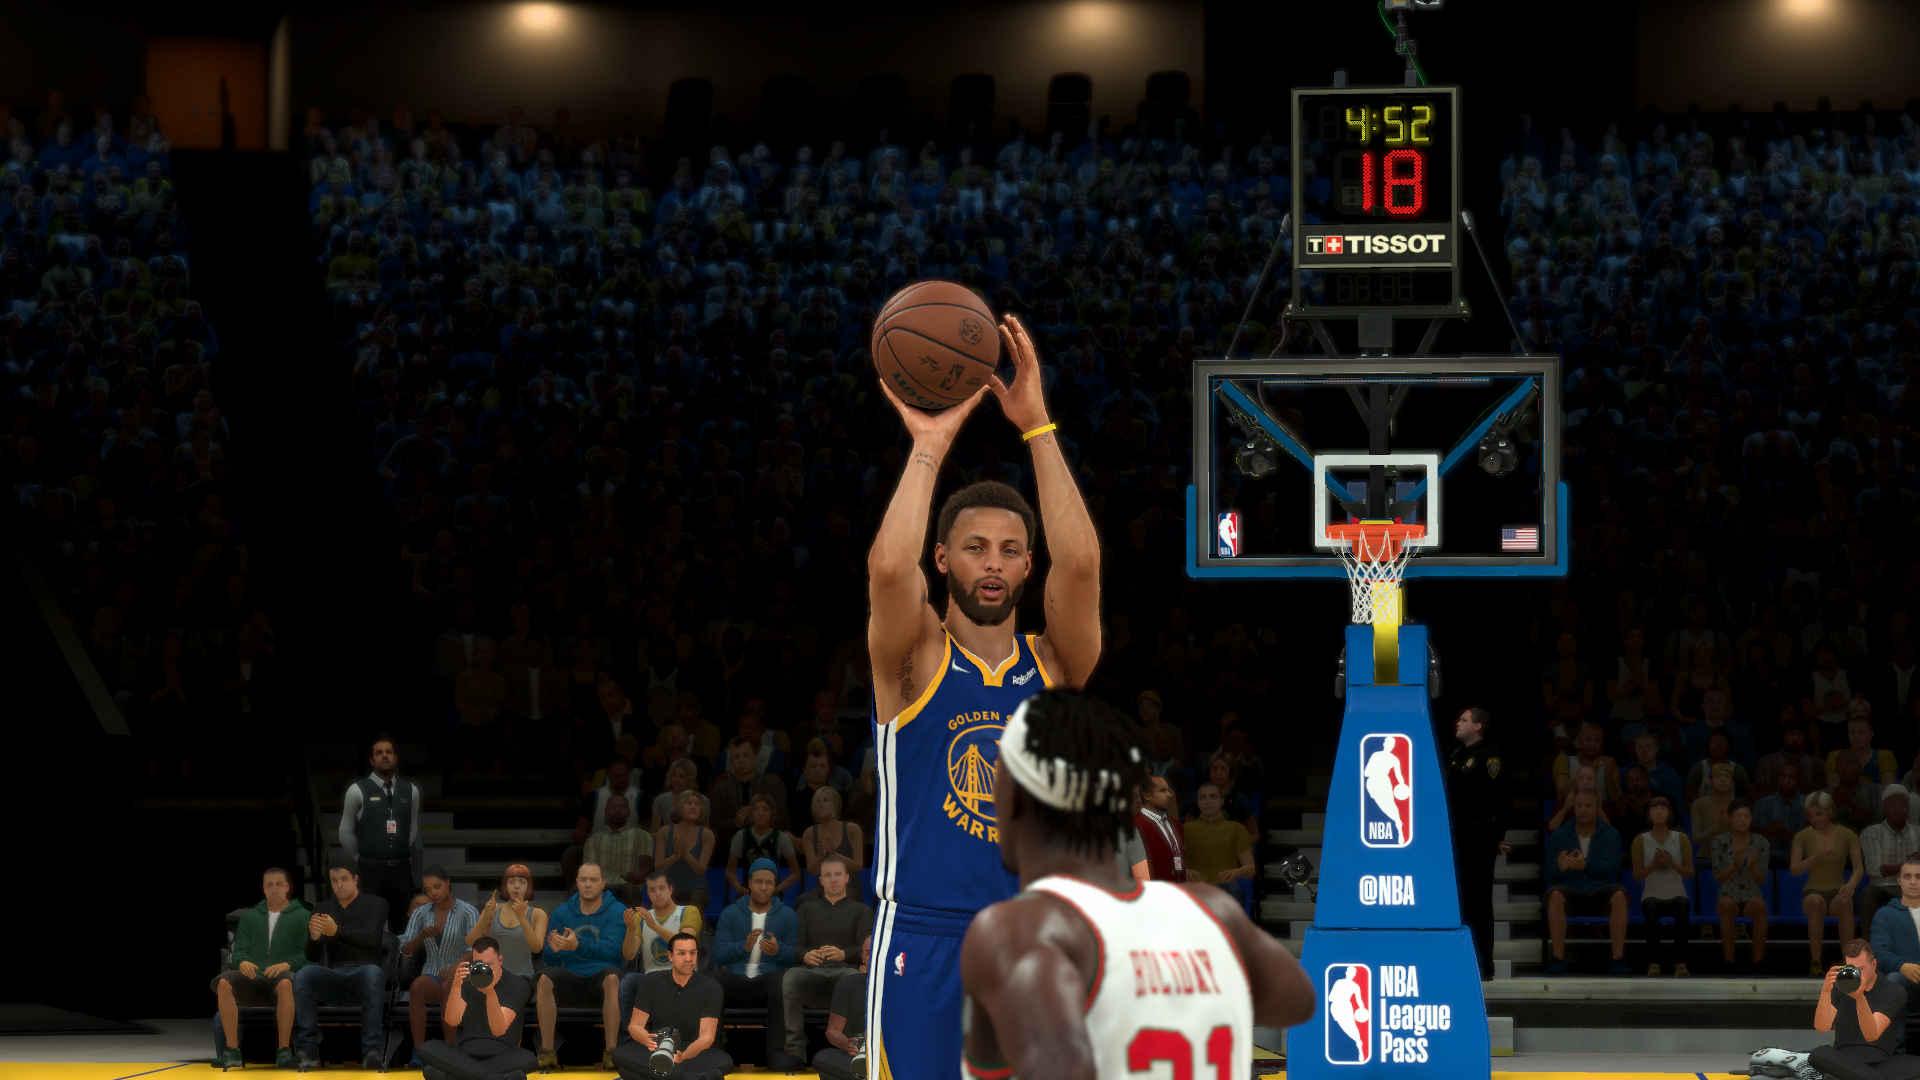 nba 2k14 cover stephen curry